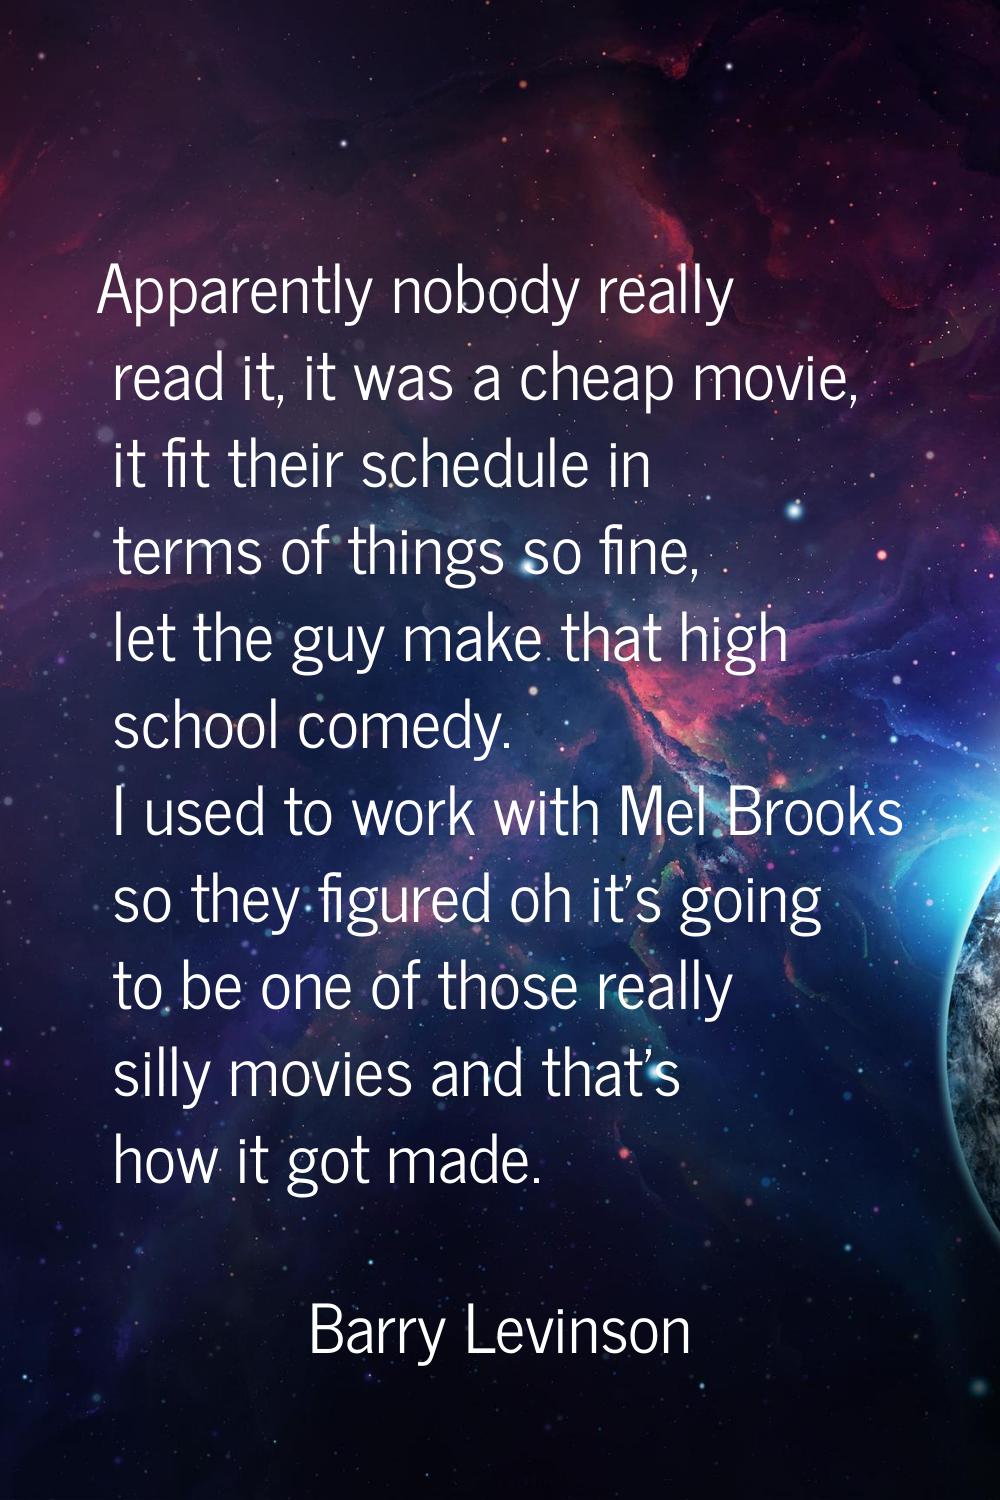 Apparently nobody really read it, it was a cheap movie, it fit their schedule in terms of things so